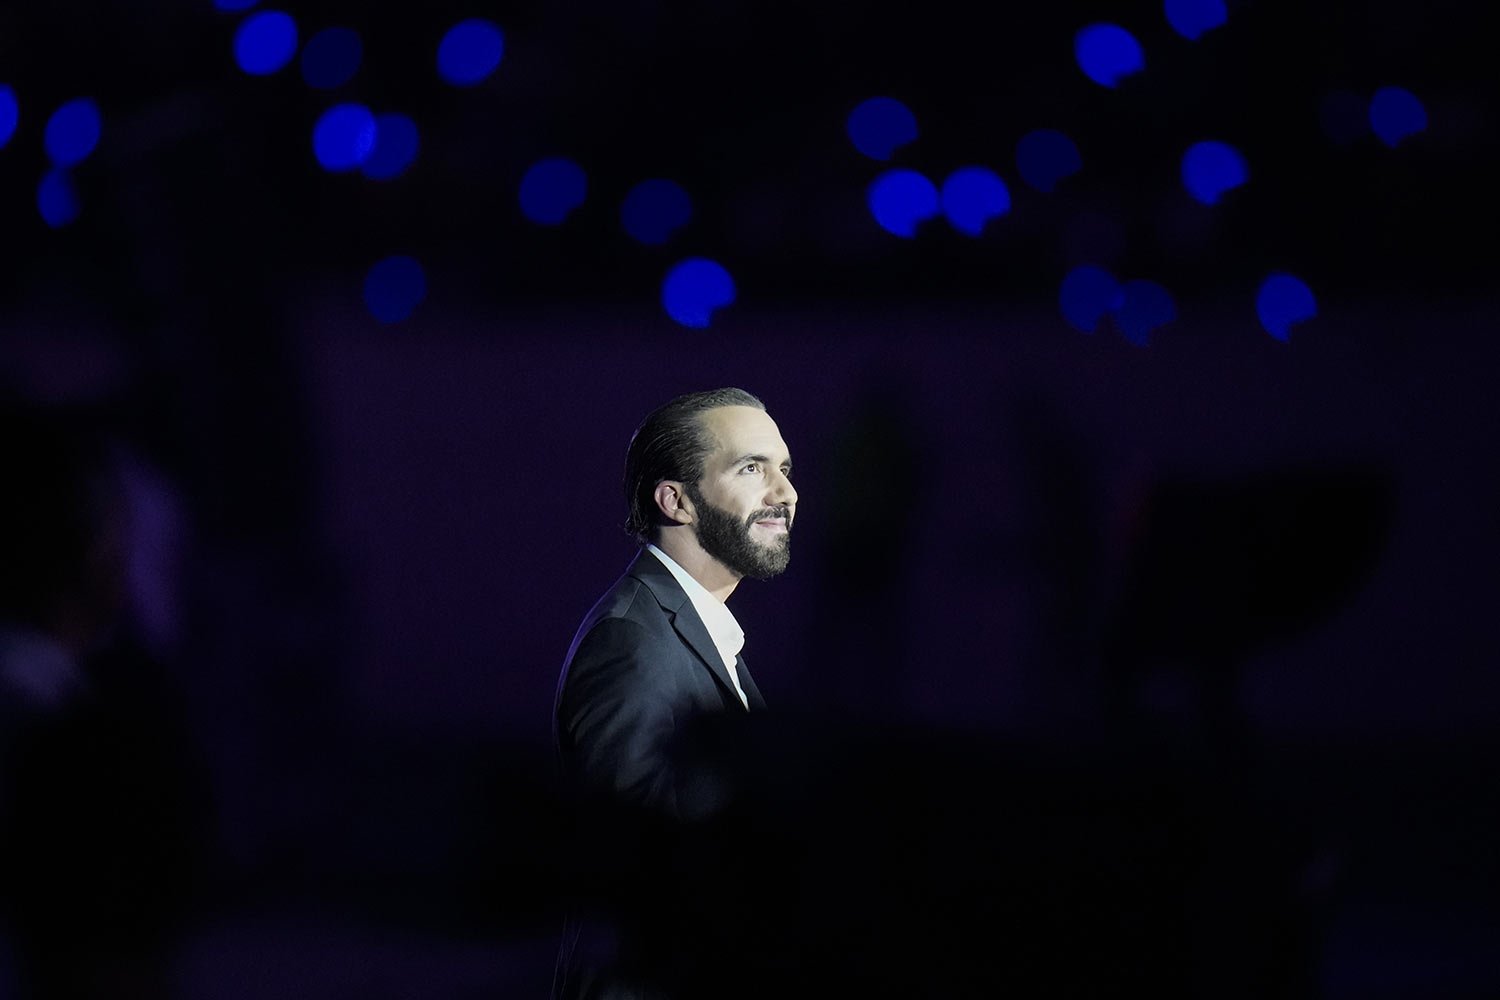  Salvadoran President Nayib Bukele is illuminated by a stage spotlight during the Central American and Caribbean Games opening ceremony, at the newly remodeled Jorge "El Magico" Gonzalez stadium in San Salvador, El Salvador, June 23, 2023.  The 41-ye